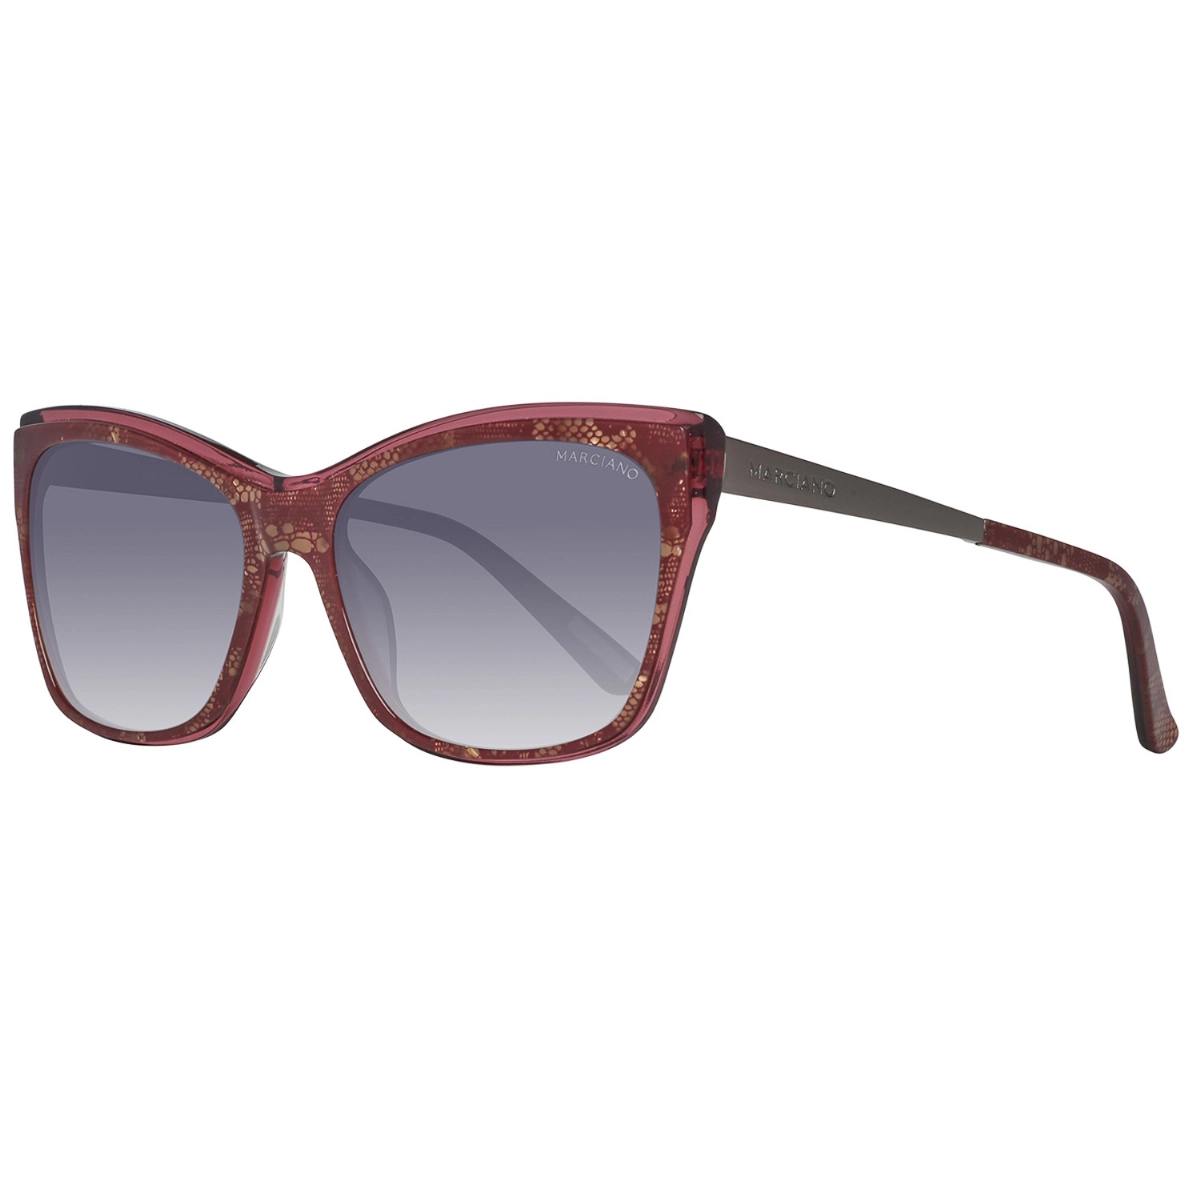 LUNETTES FEMMES GUESS MARCIANO GM0739-5771B